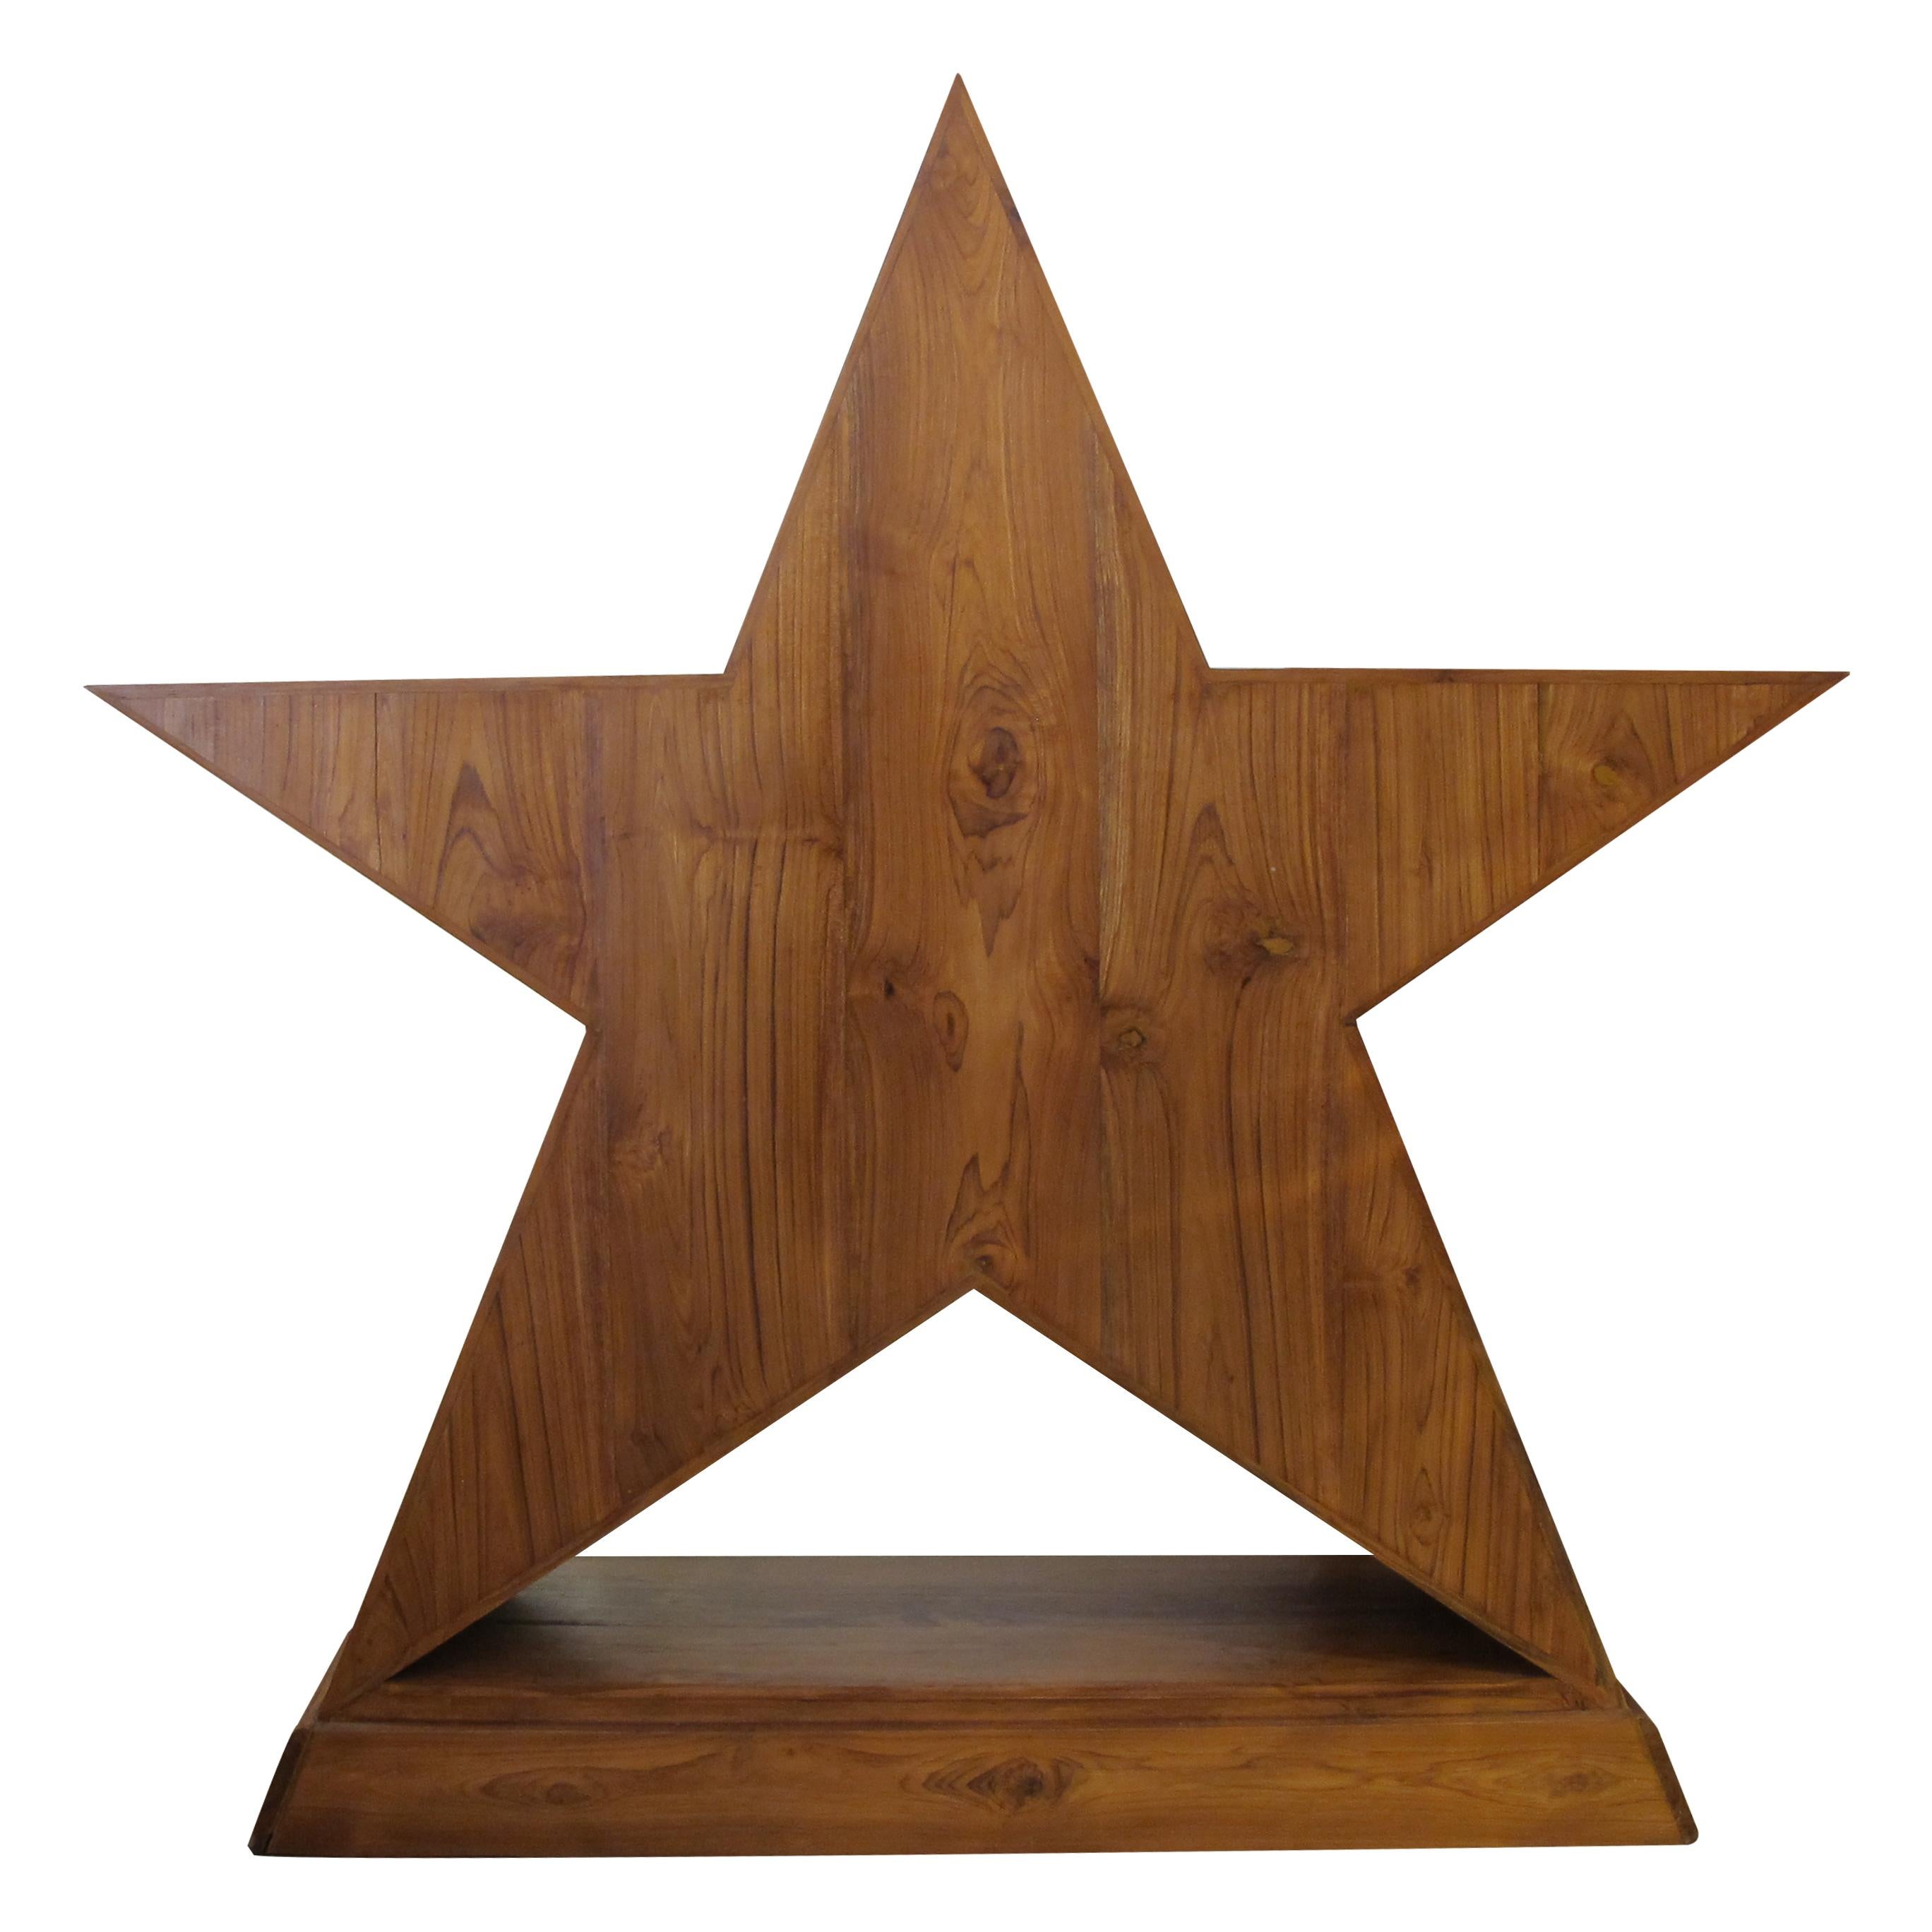 A very unusual and elegant star-shaped Walnut chest of drawers featuring three small drawers of different sizes in its centre. This exceptional piece was certainly commissioned specifically for someone and made by a Fine cabinet maker. The chest of